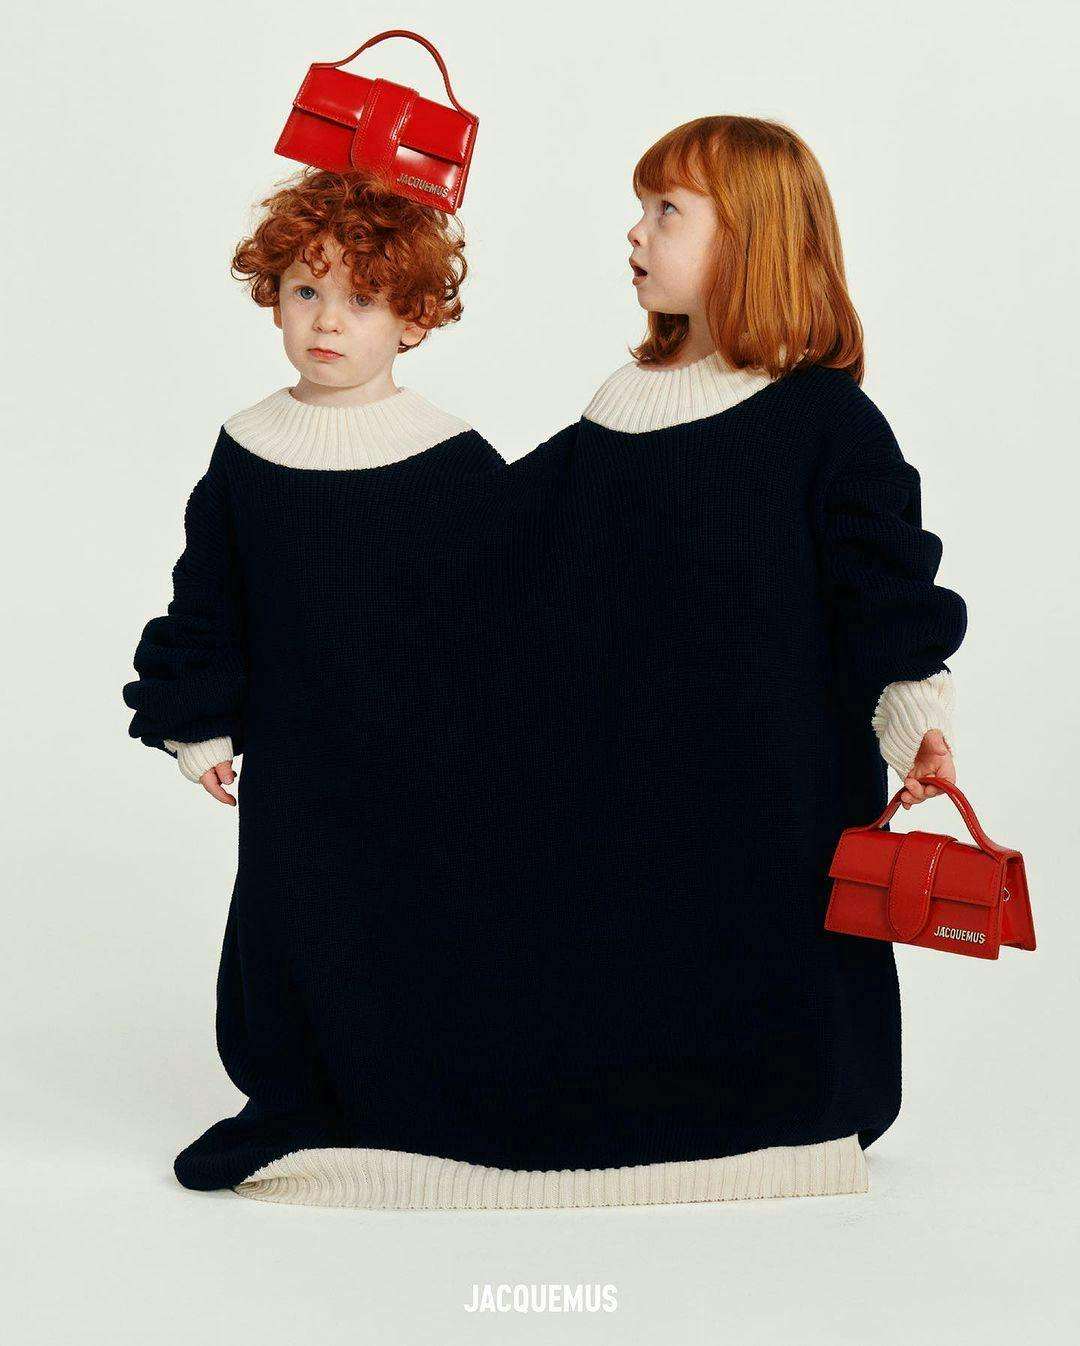 jacquemus-first-kids-collection-mini-me